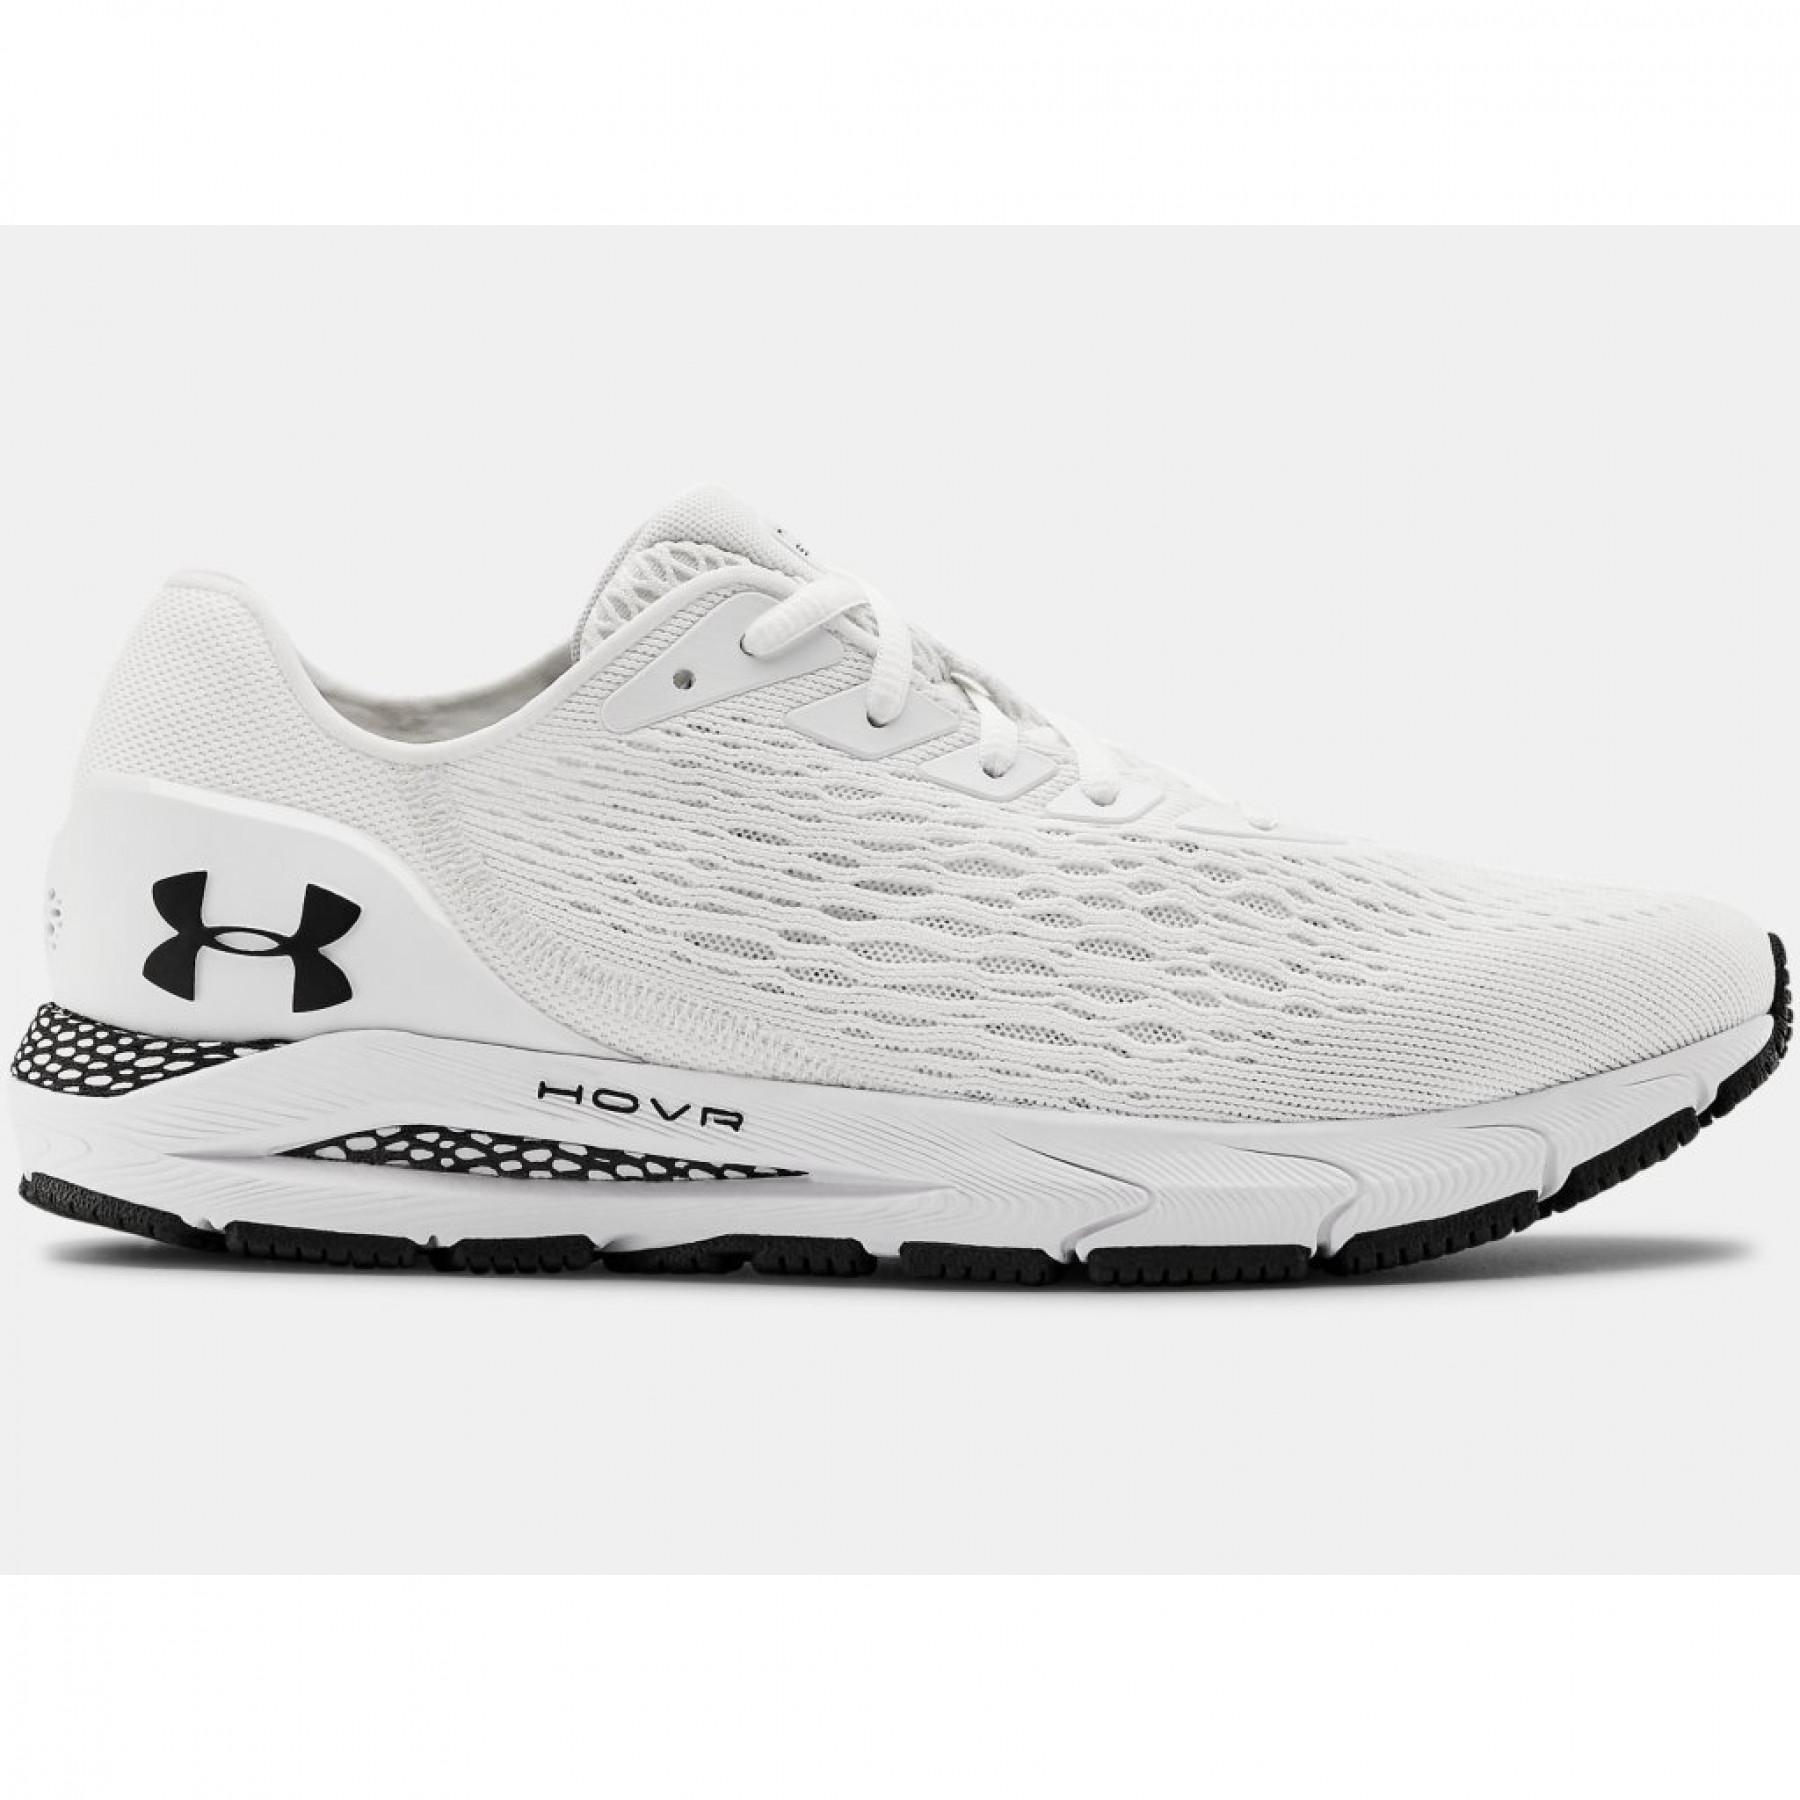 Chaussures de running Under Armour HOVR™ Sonic 3